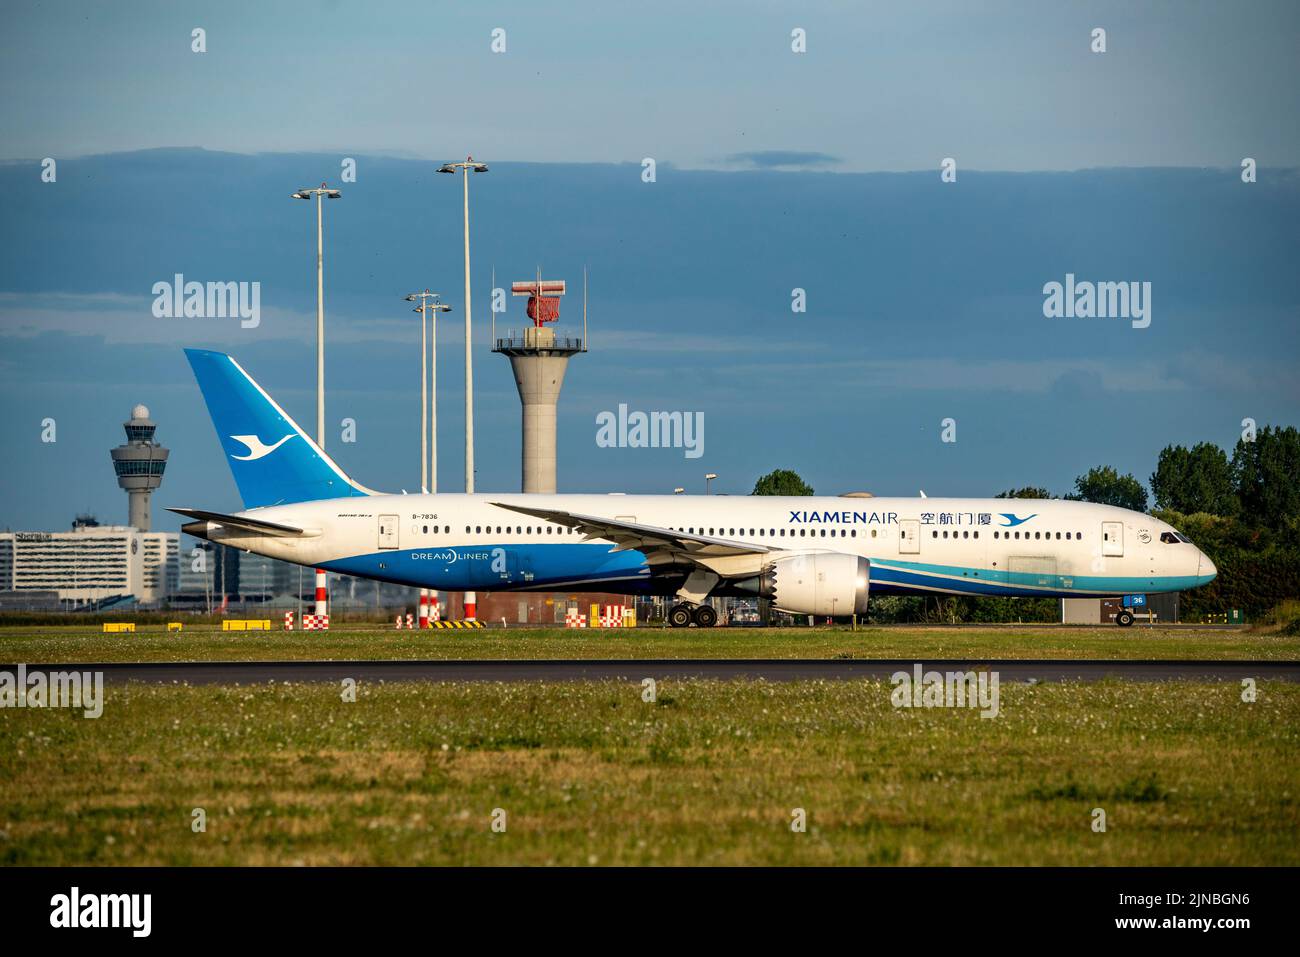 Amsterdam Shiphol Airport, Polderbaan, one of 6 runways, tower air traffic control, on taxiway to take-off, B-7836, Xiamen Airlines Boeing 787-9 Dream Stock Photo